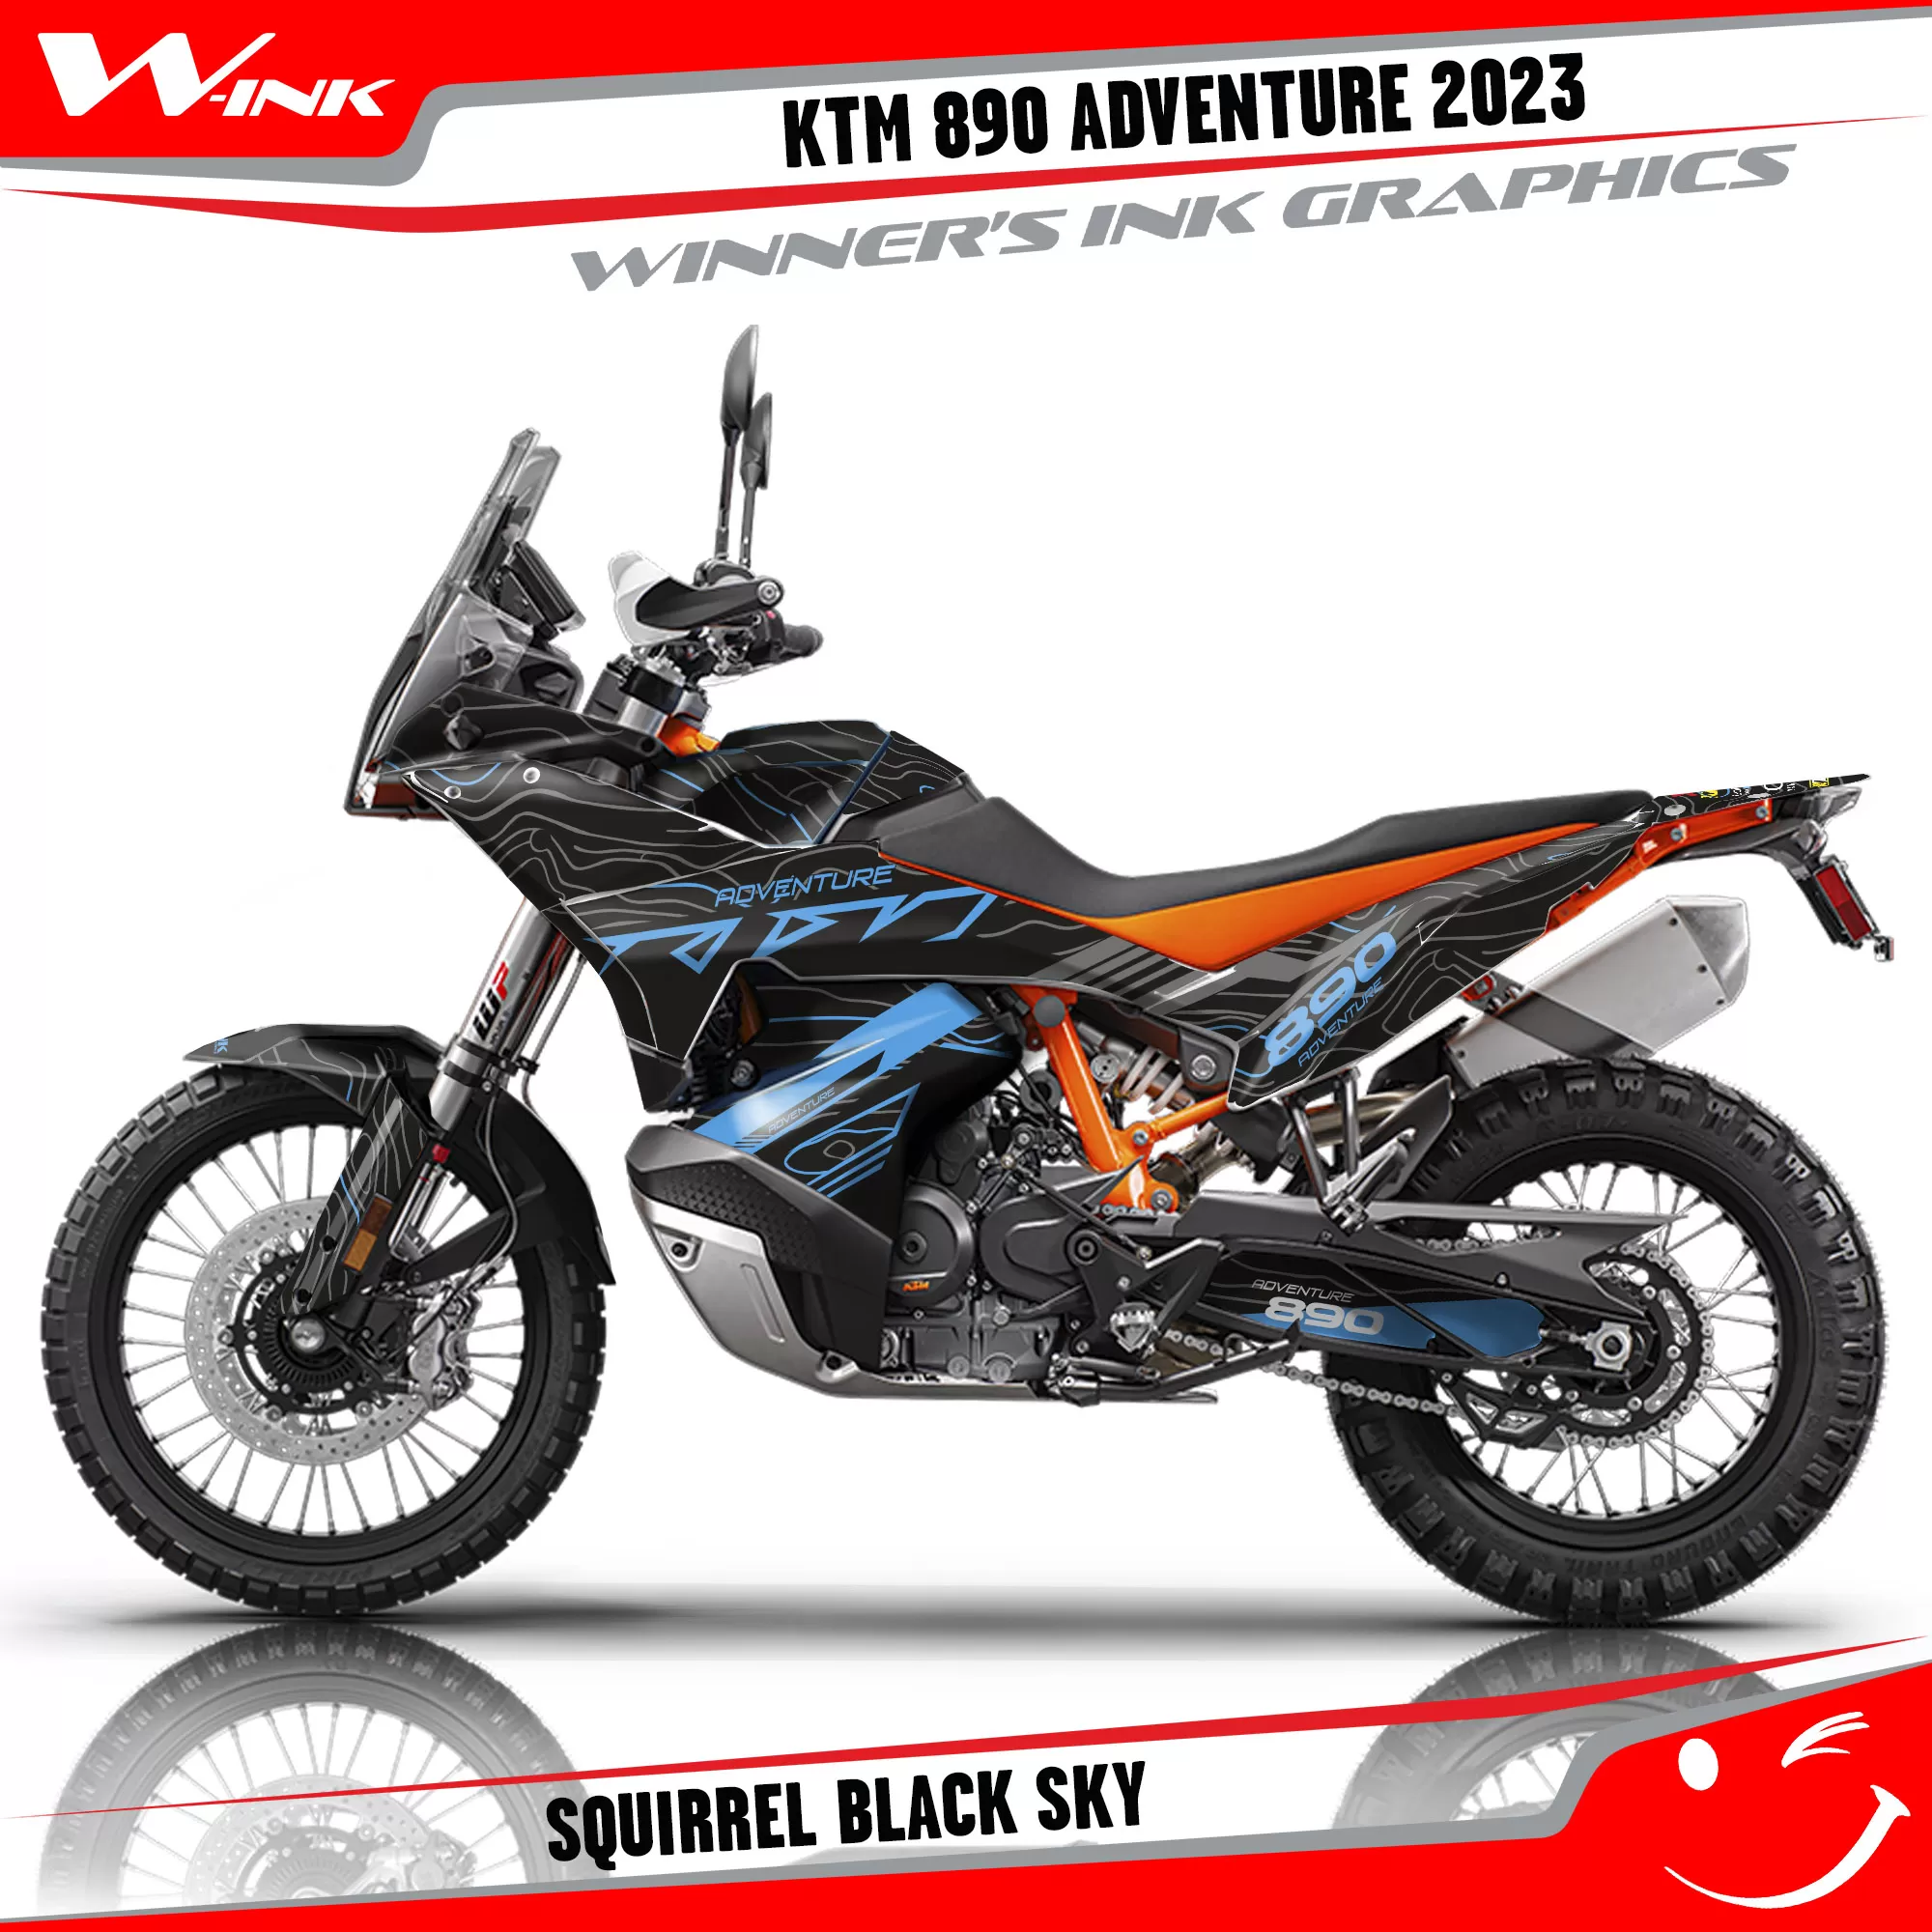 Adventure-890-2023-graphics-kit-and-decals-with-design-Squirrel-Black-Sky